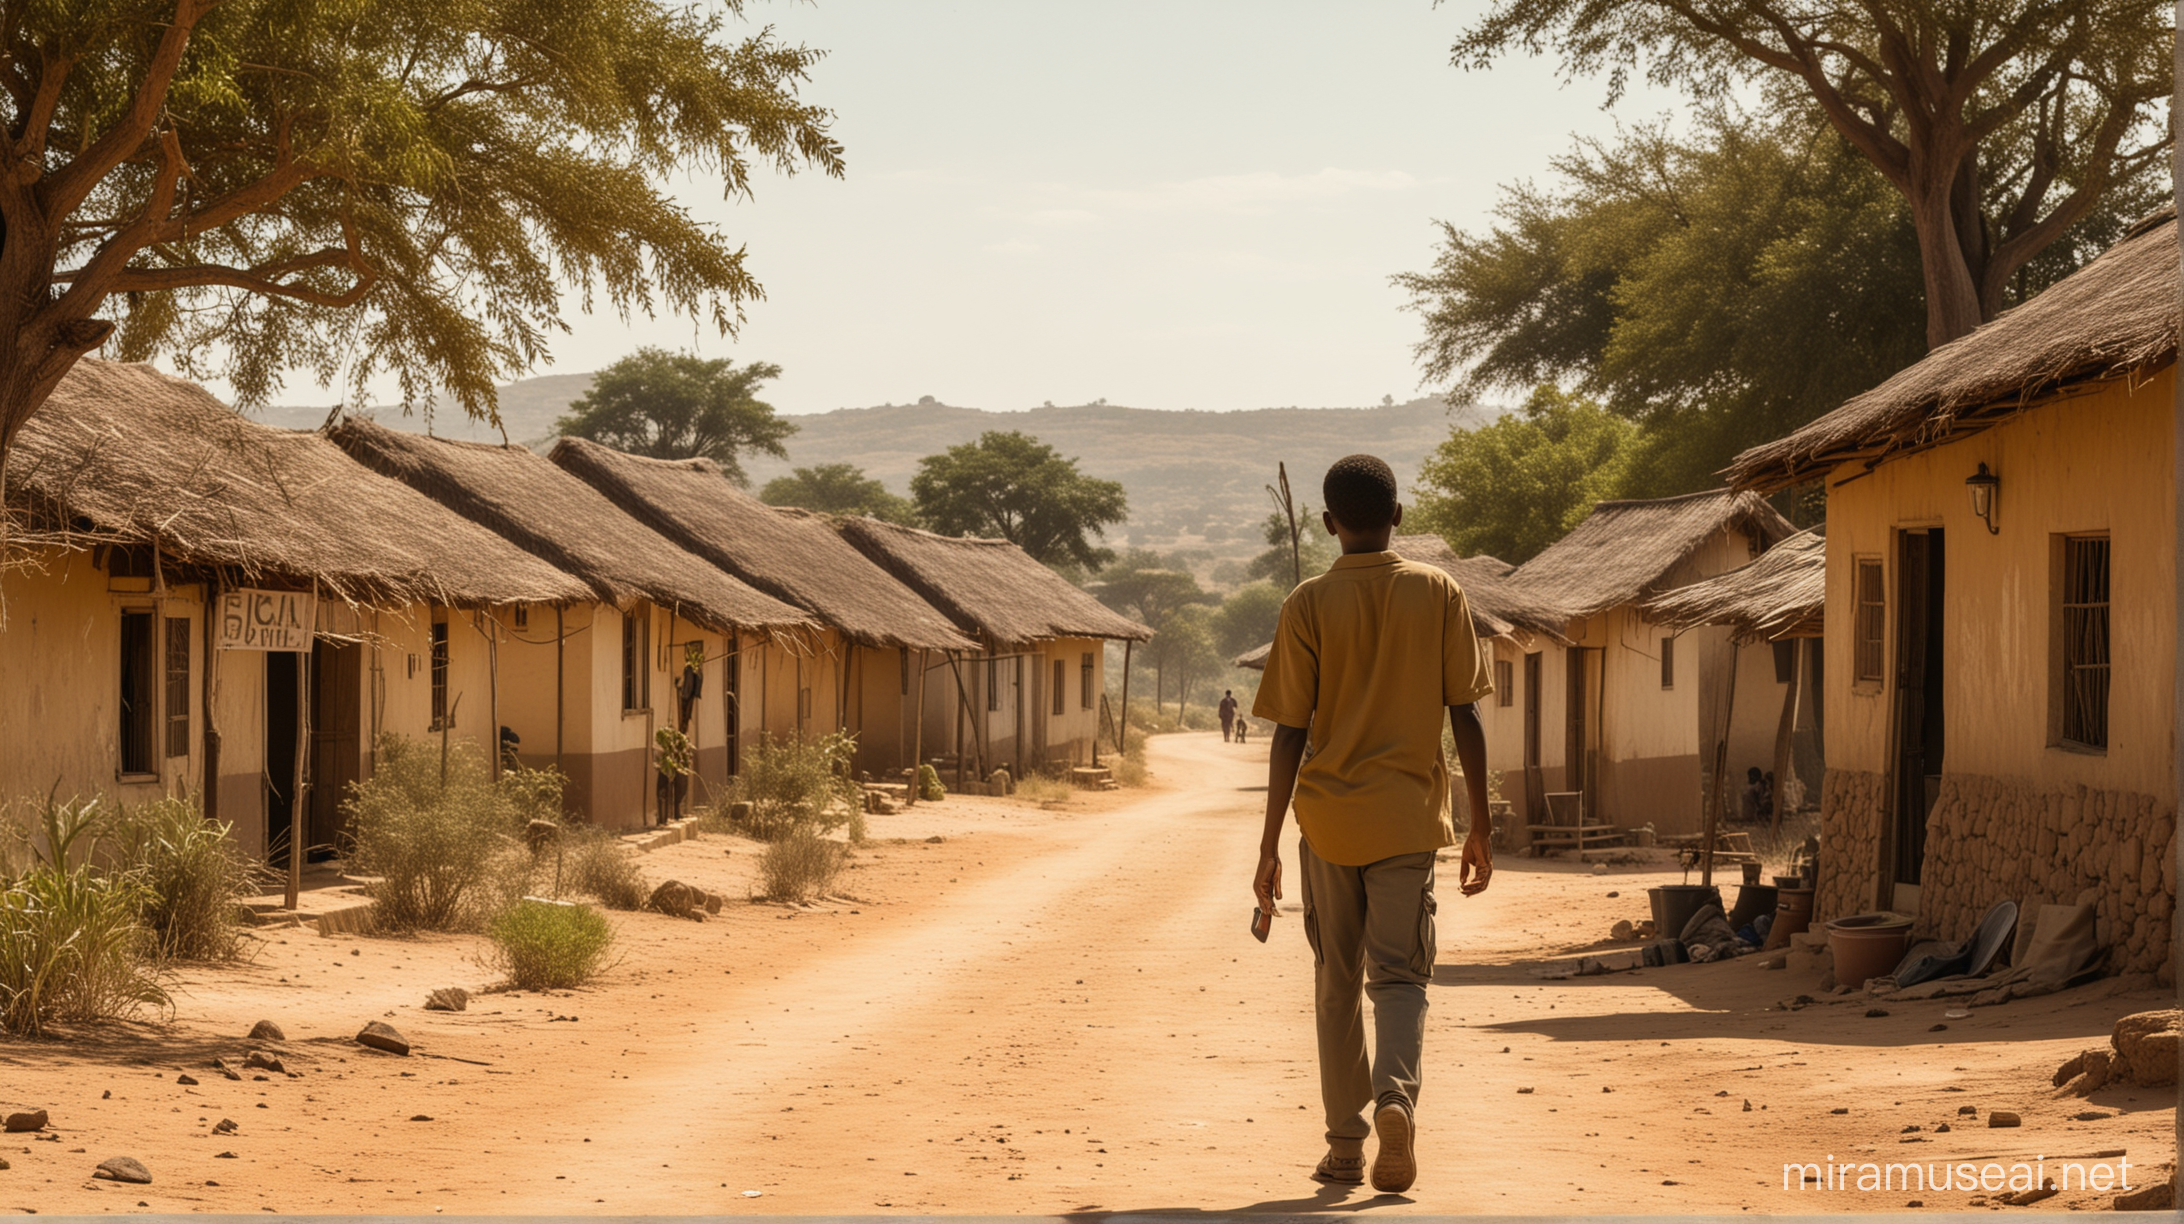 African School Boy Walking to School in SunDrenched Village of Mbala